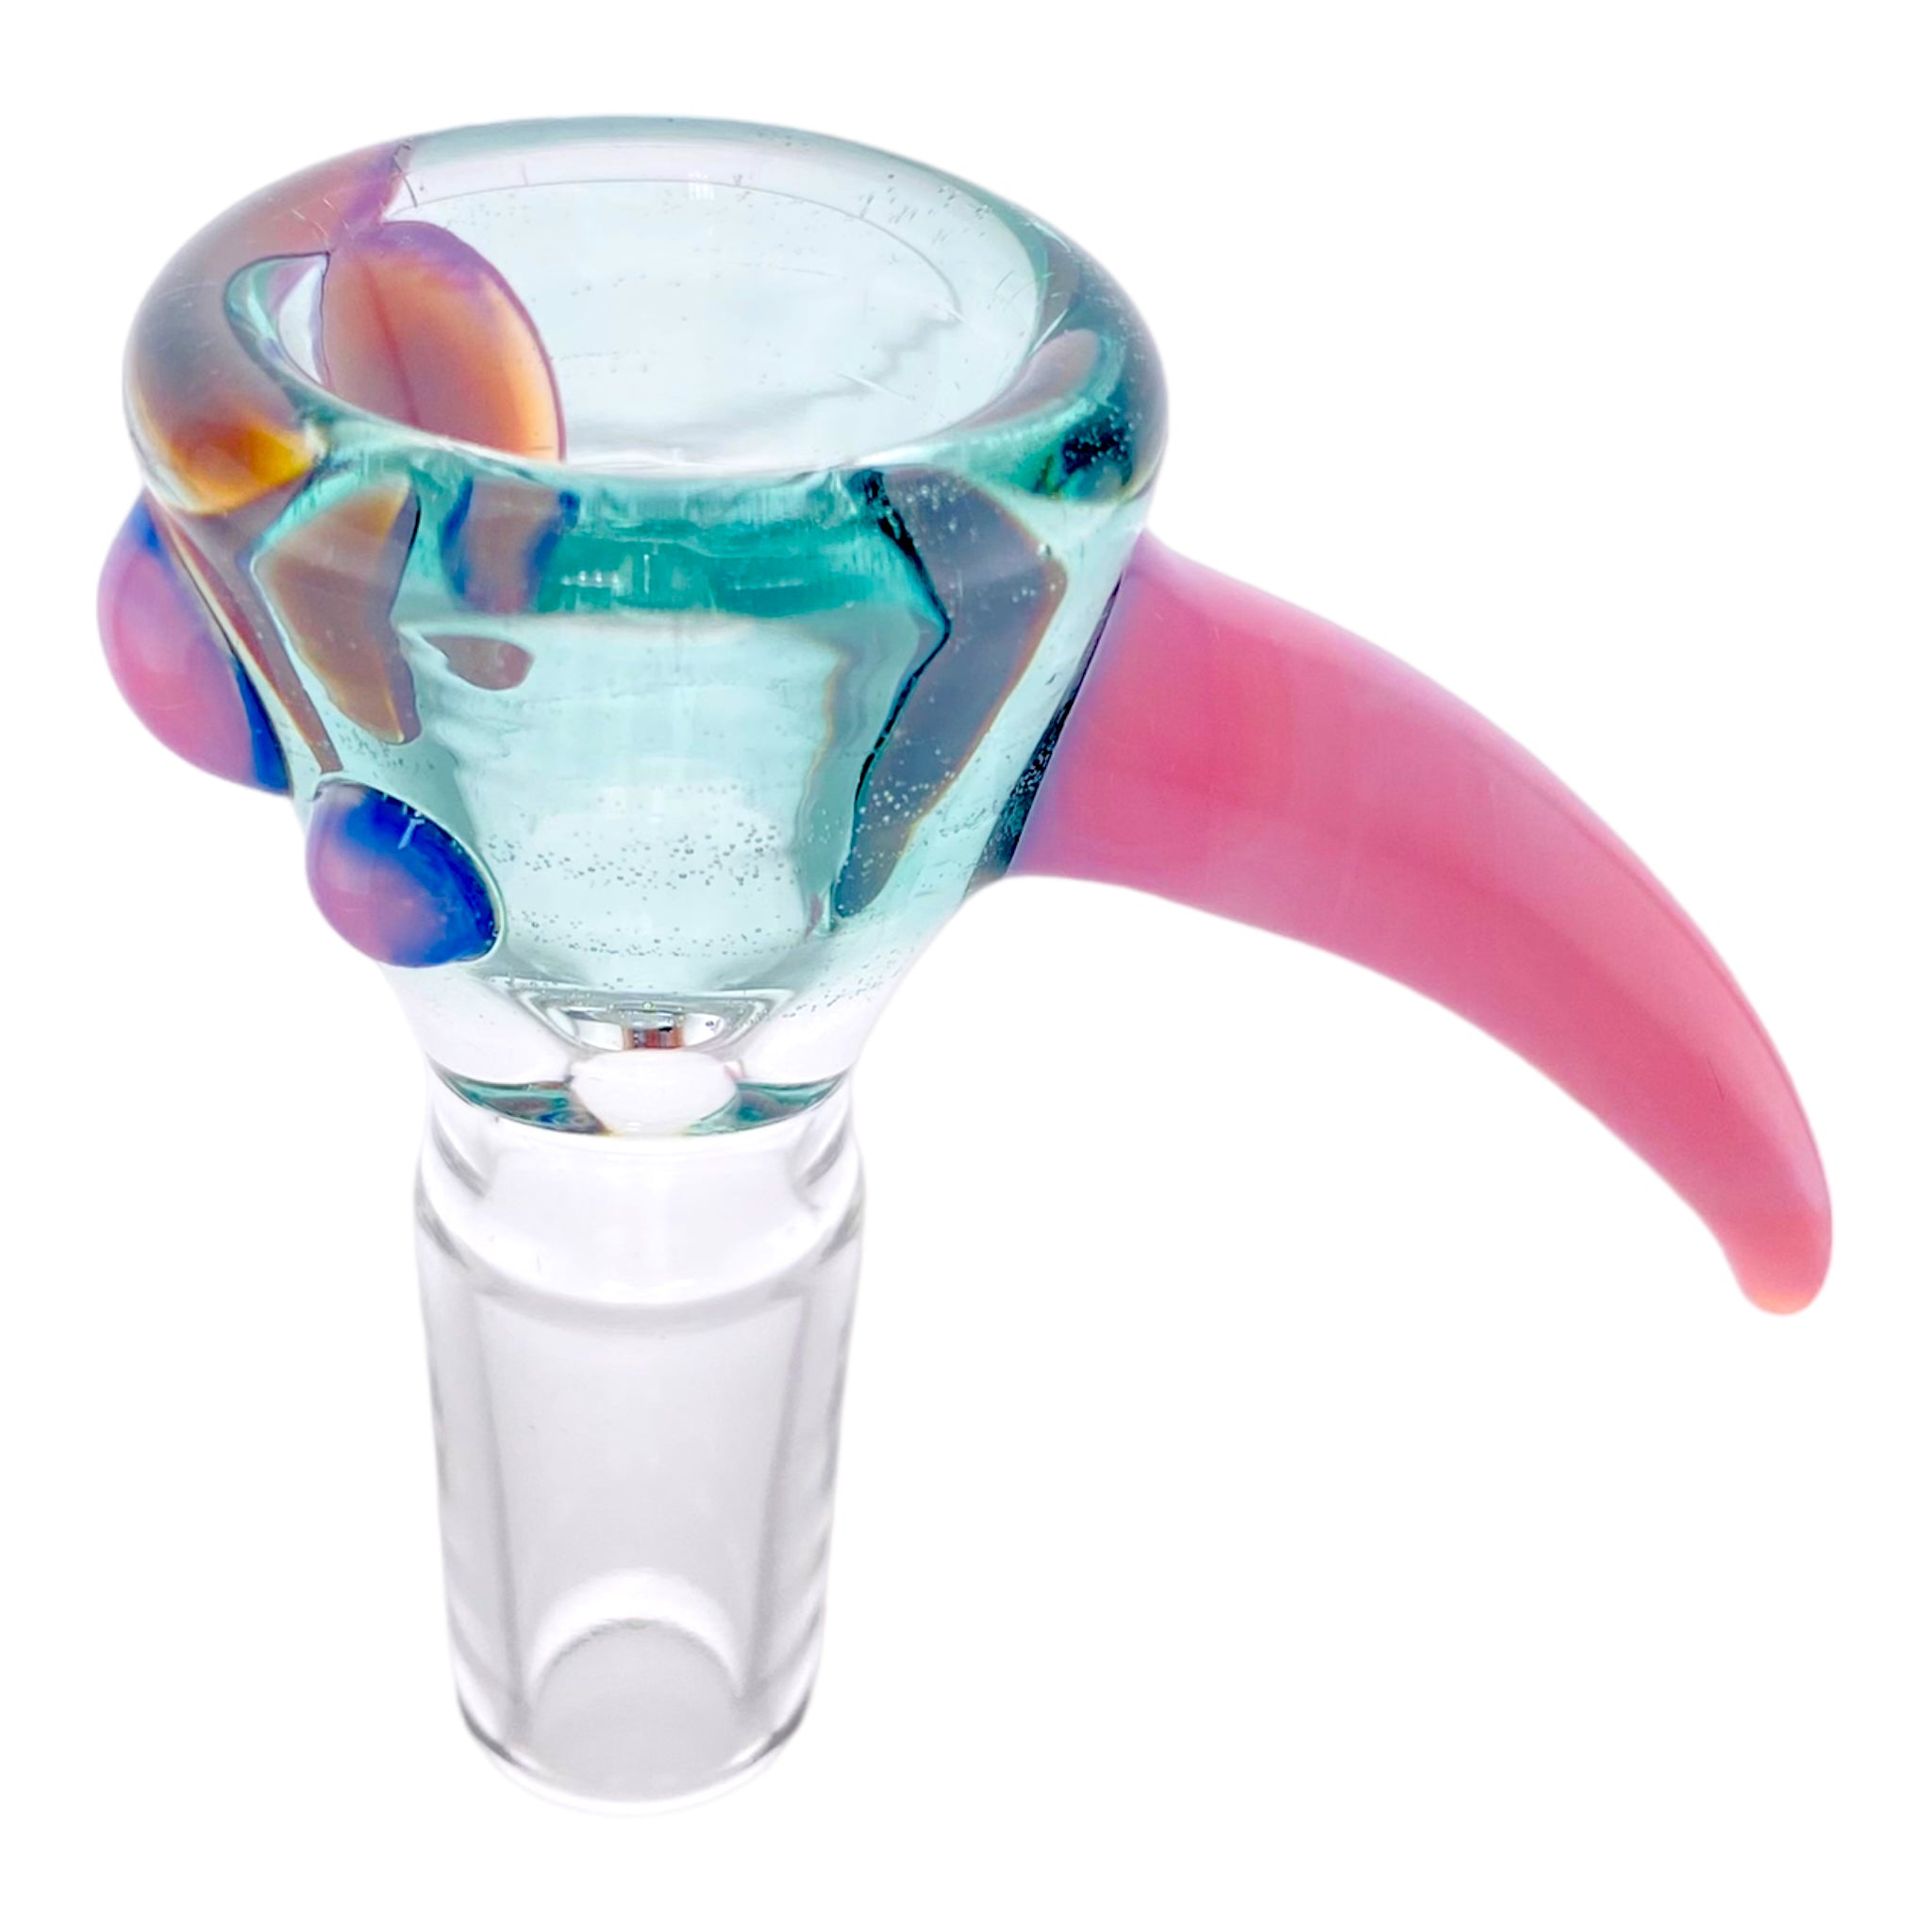 Arko Glass - 14mm Flower Bowl - Tonic Blue Bowl With Pink Handle